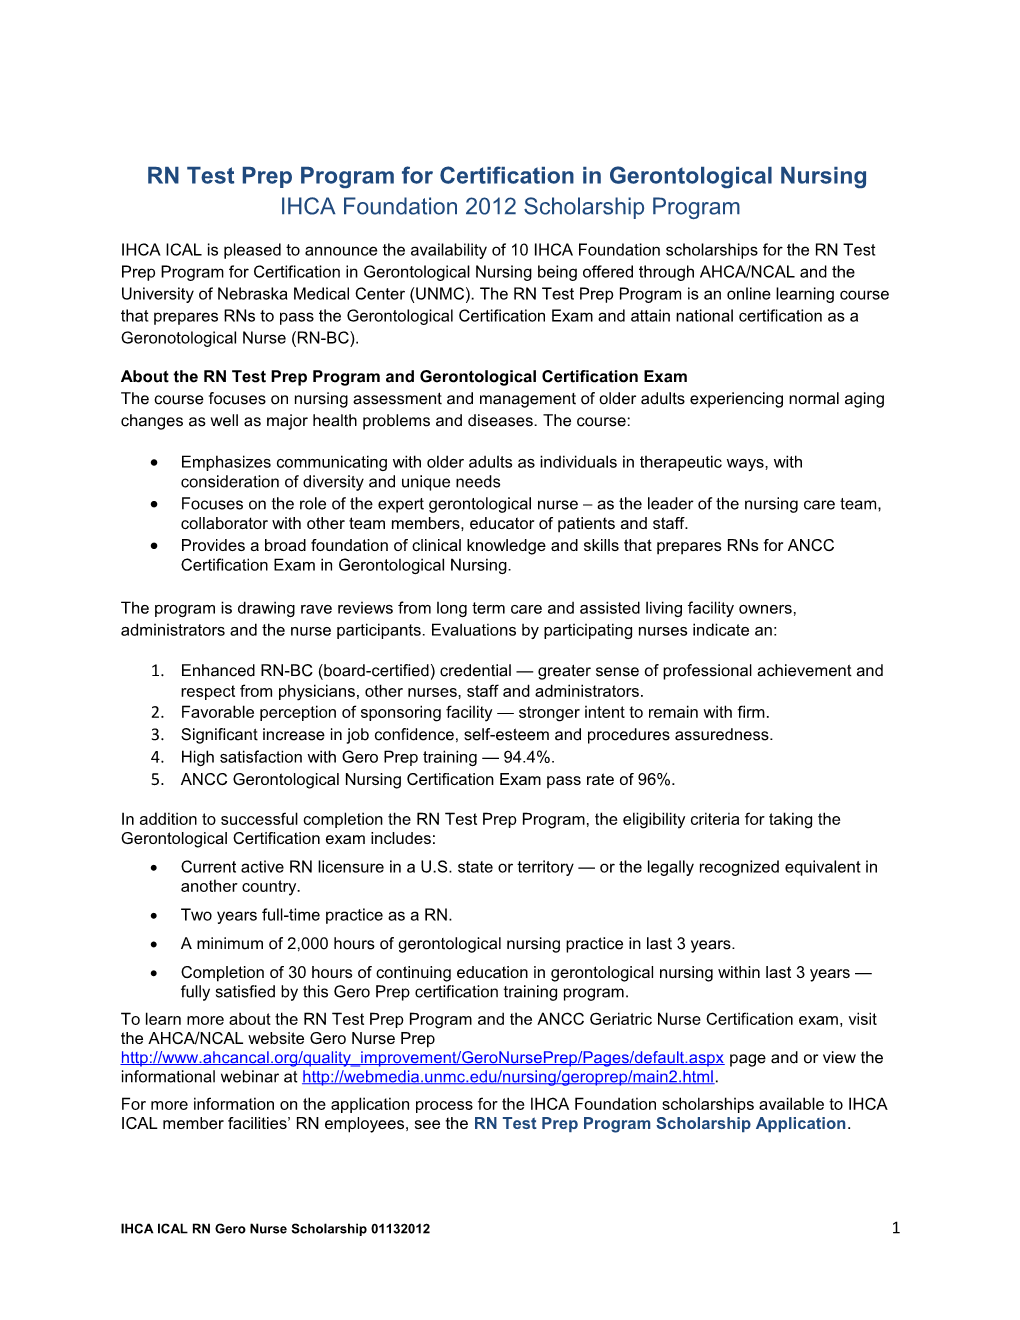 About the RN Test Prep Program and Gerontological Certification Exam